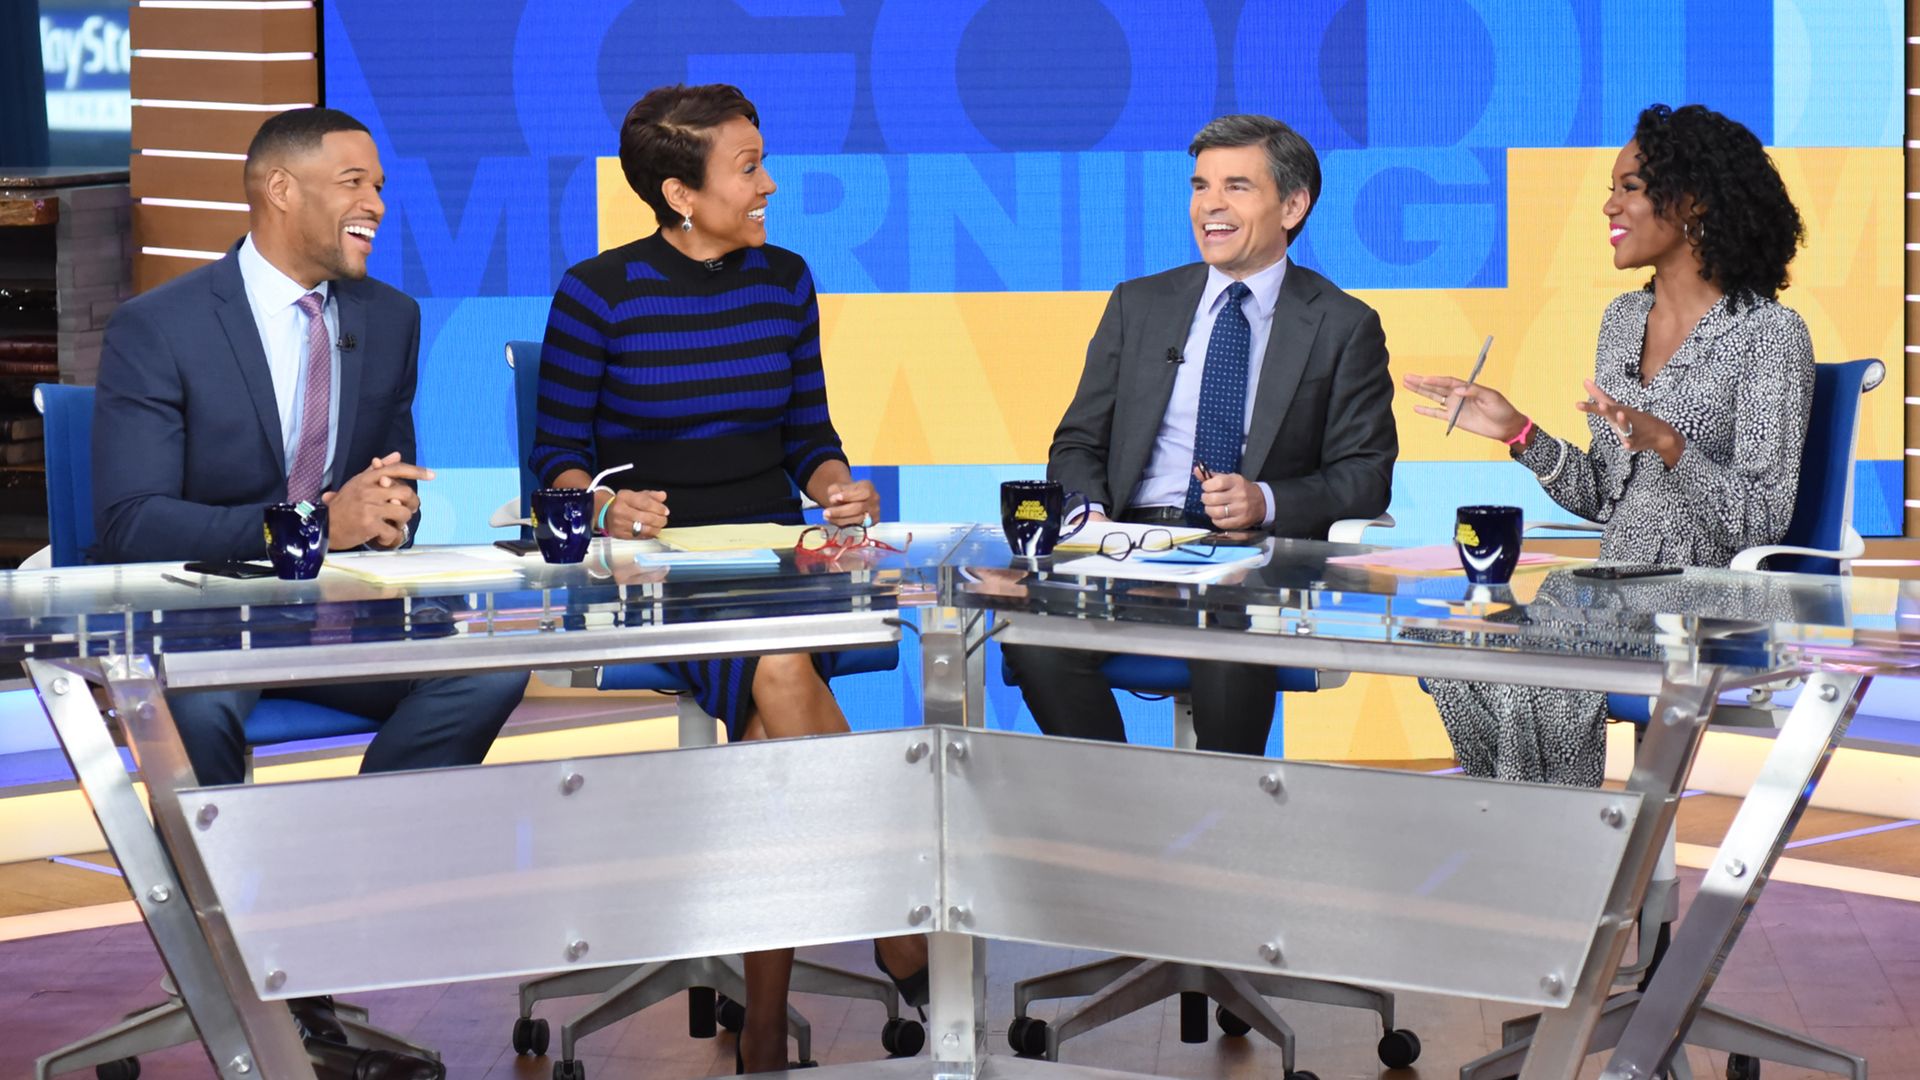 GOOD MORNING AMERICA - 2/11/19
Janai Norman on Walt Disney Television via Getty Images's "Good Morning America," Monday, February 11, 2018. "Good Morning America" airs Monday-Friday on Walt Disney Television via Getty Images.
MICHAEL STRAHAN, ROBIN ROBERTS, GEORGE STEPHANOPOULOS, JANAI NORMAN